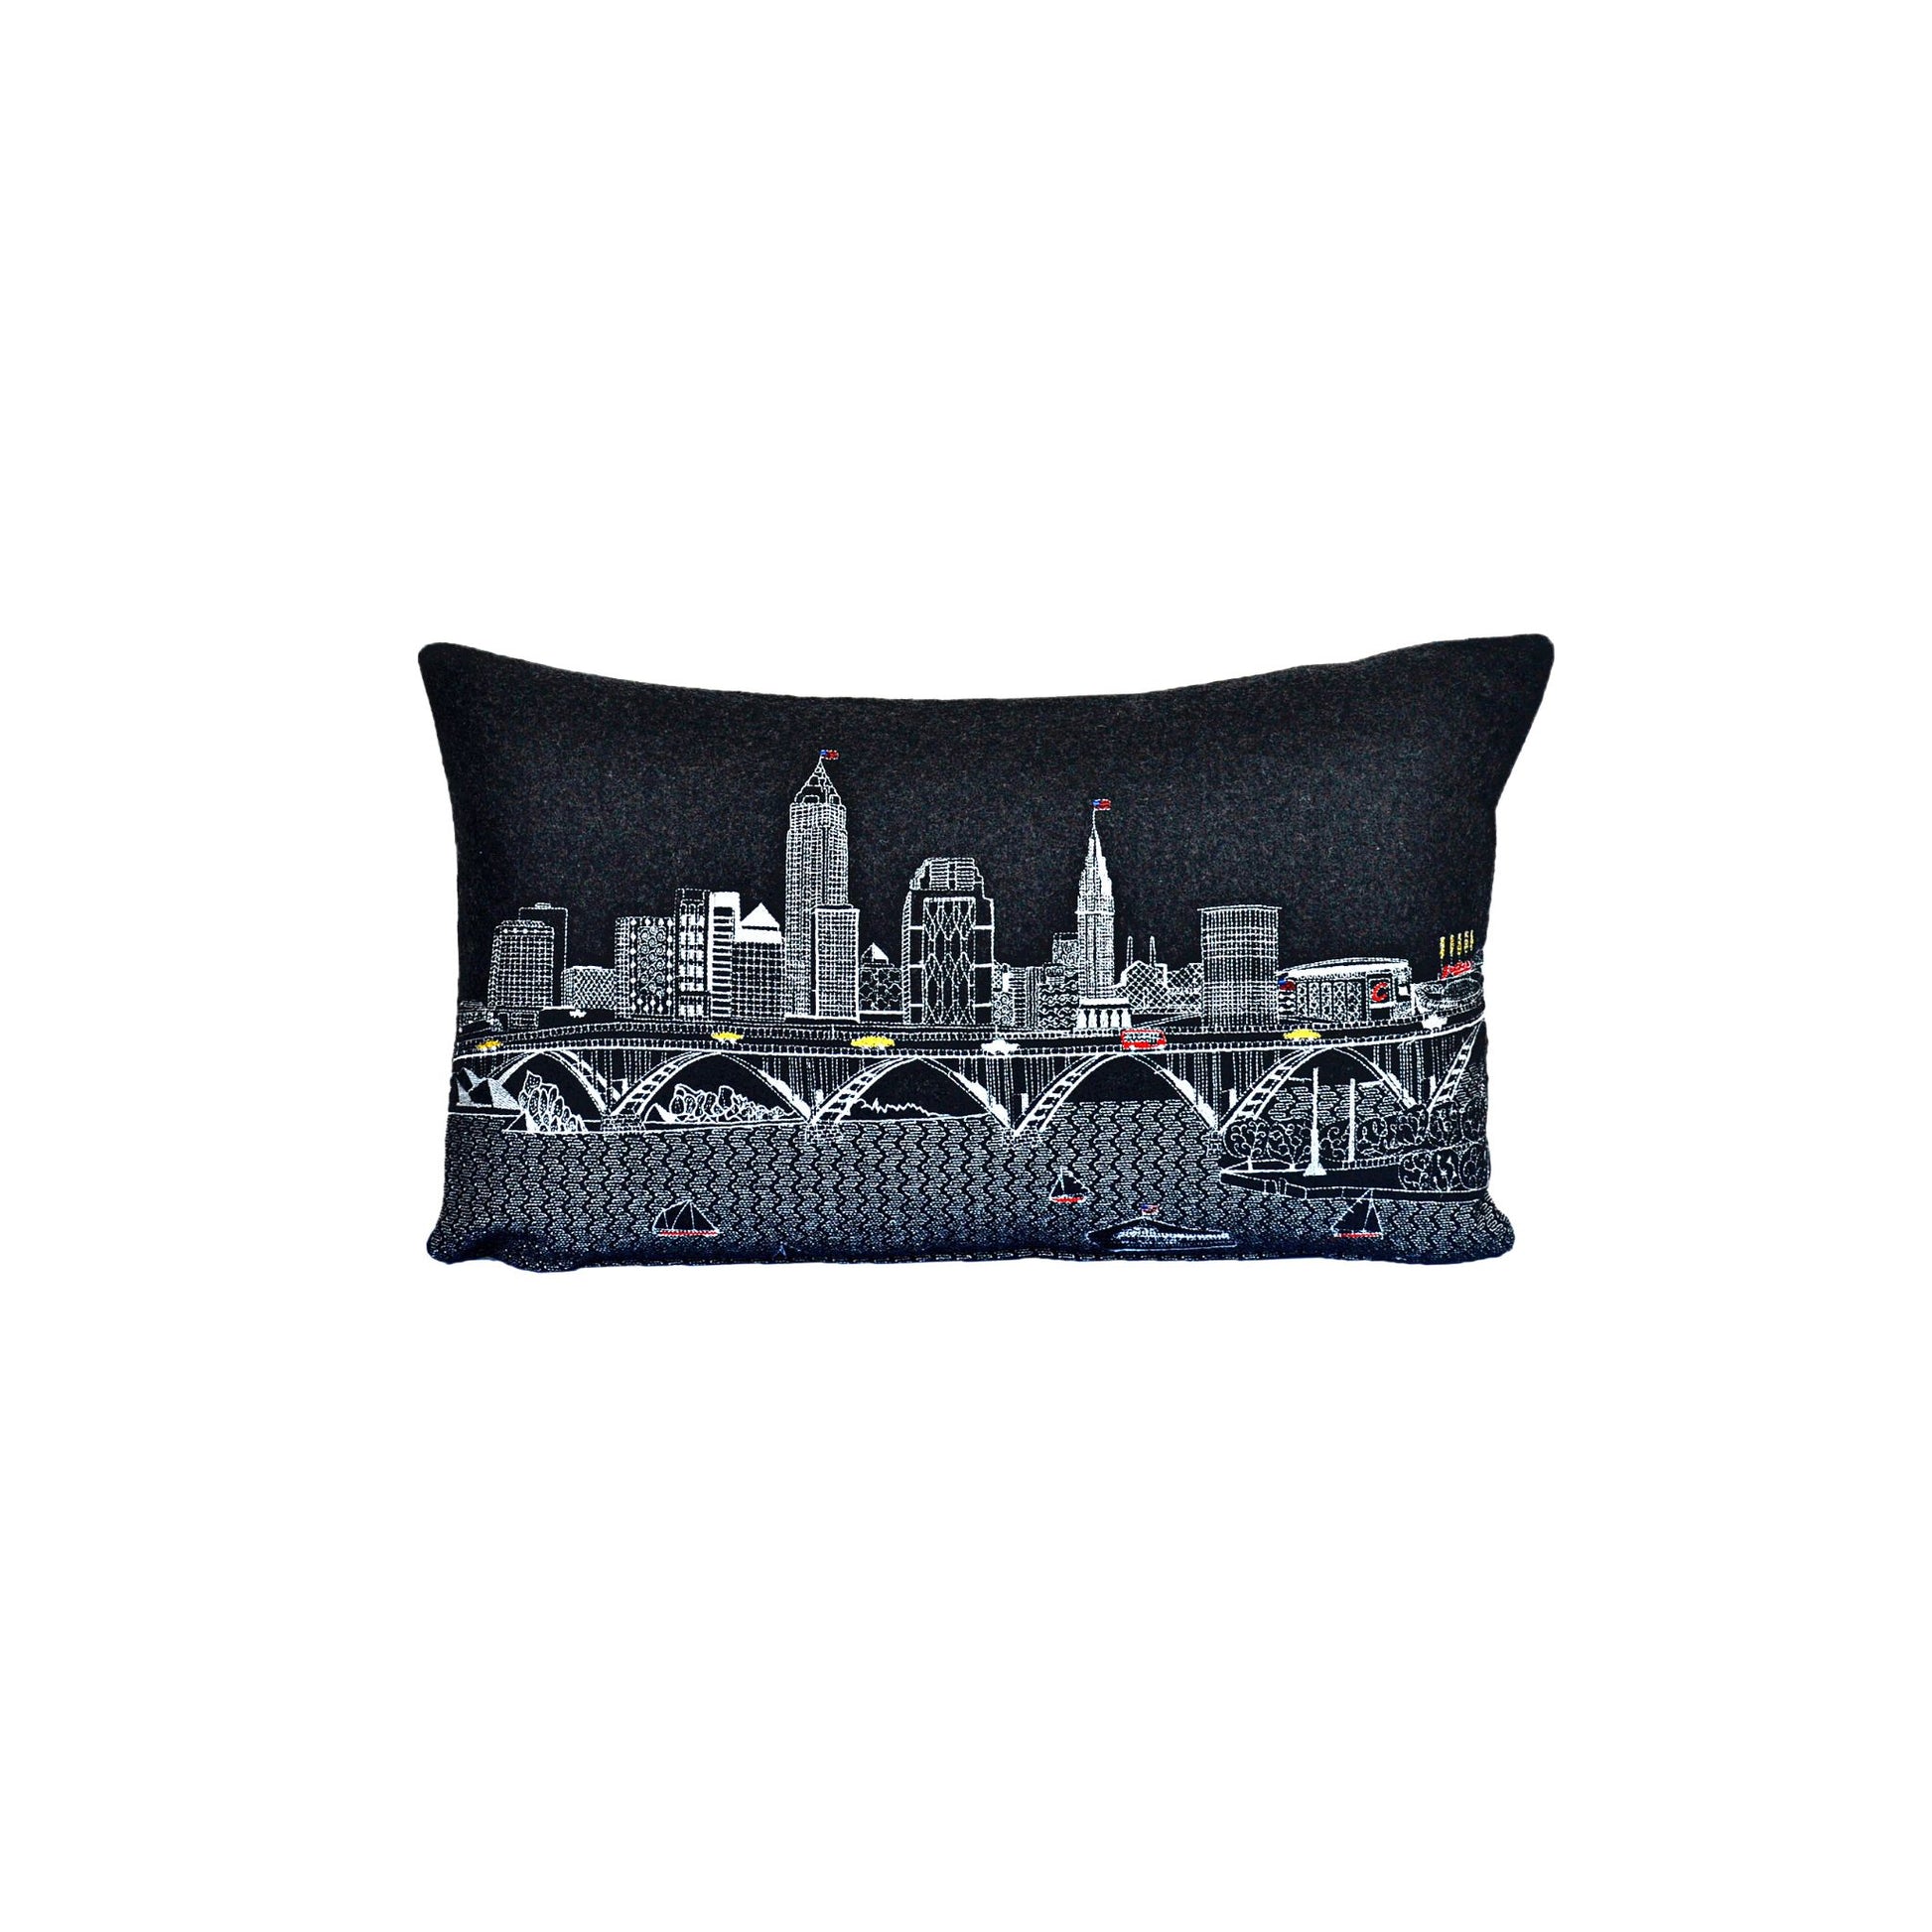 Cleveland Night Prince Pillow